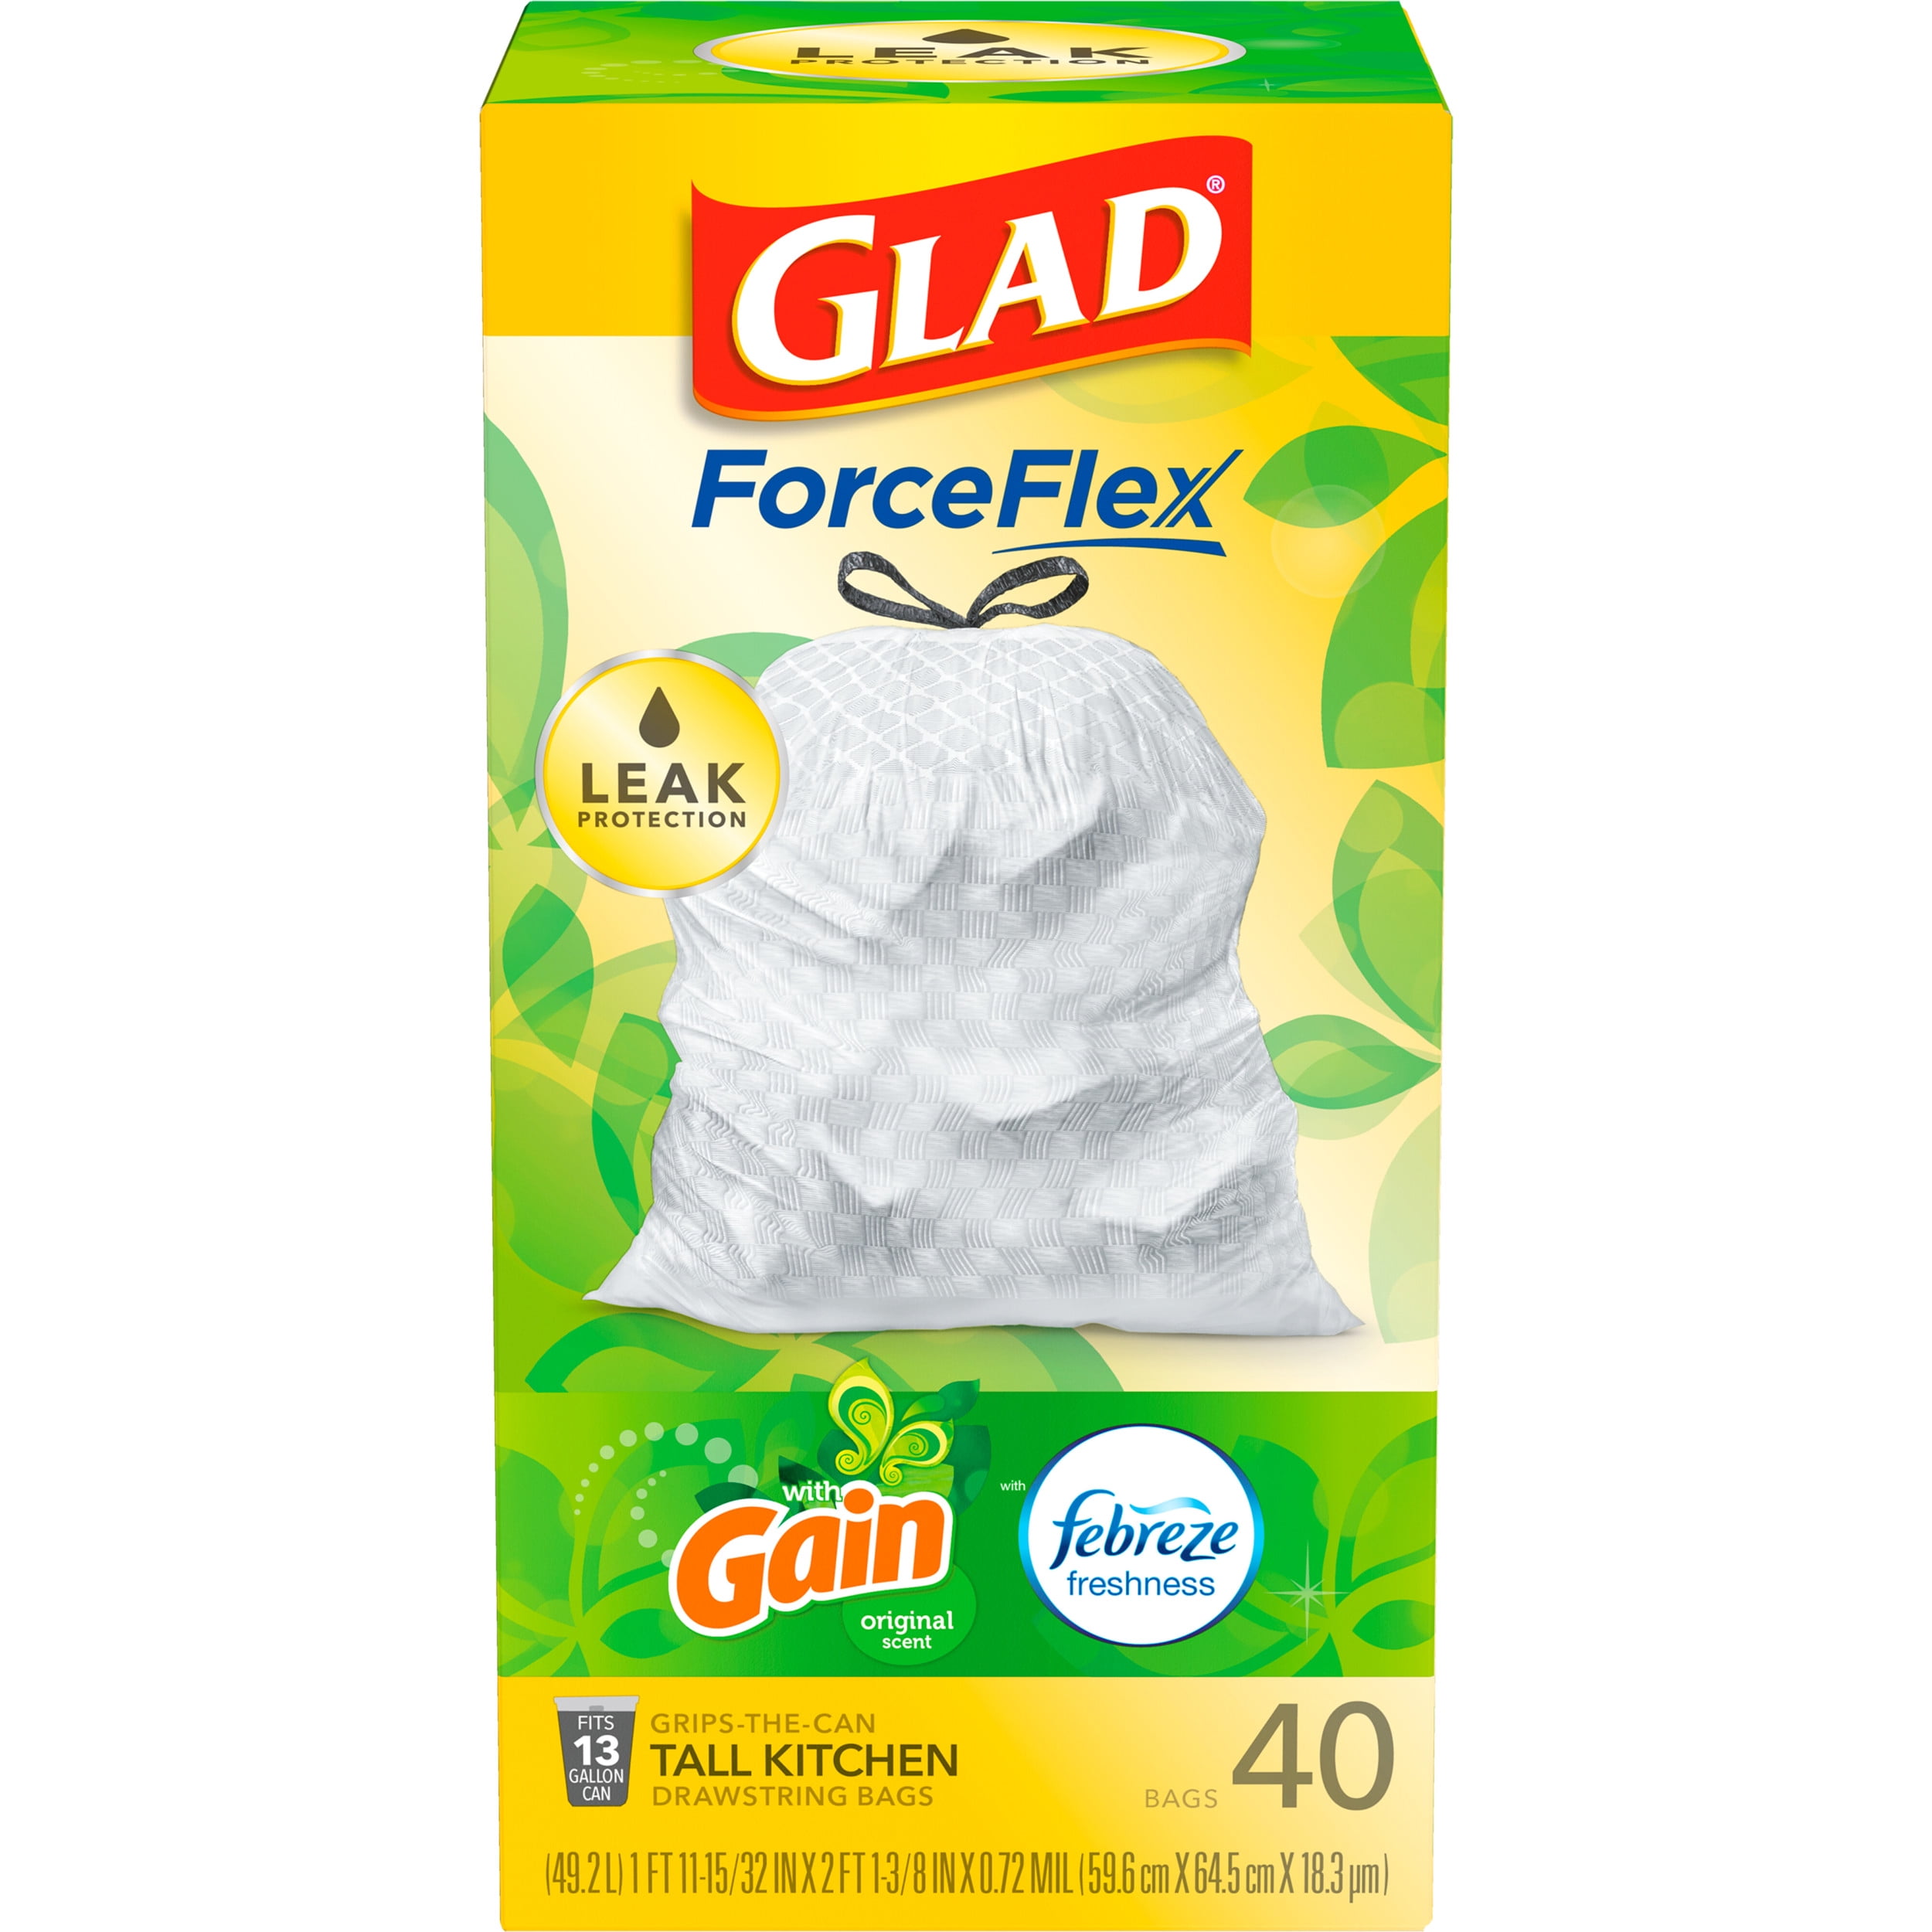 GLAD 13 Gallons Plastic Trash Bags - 400 Count